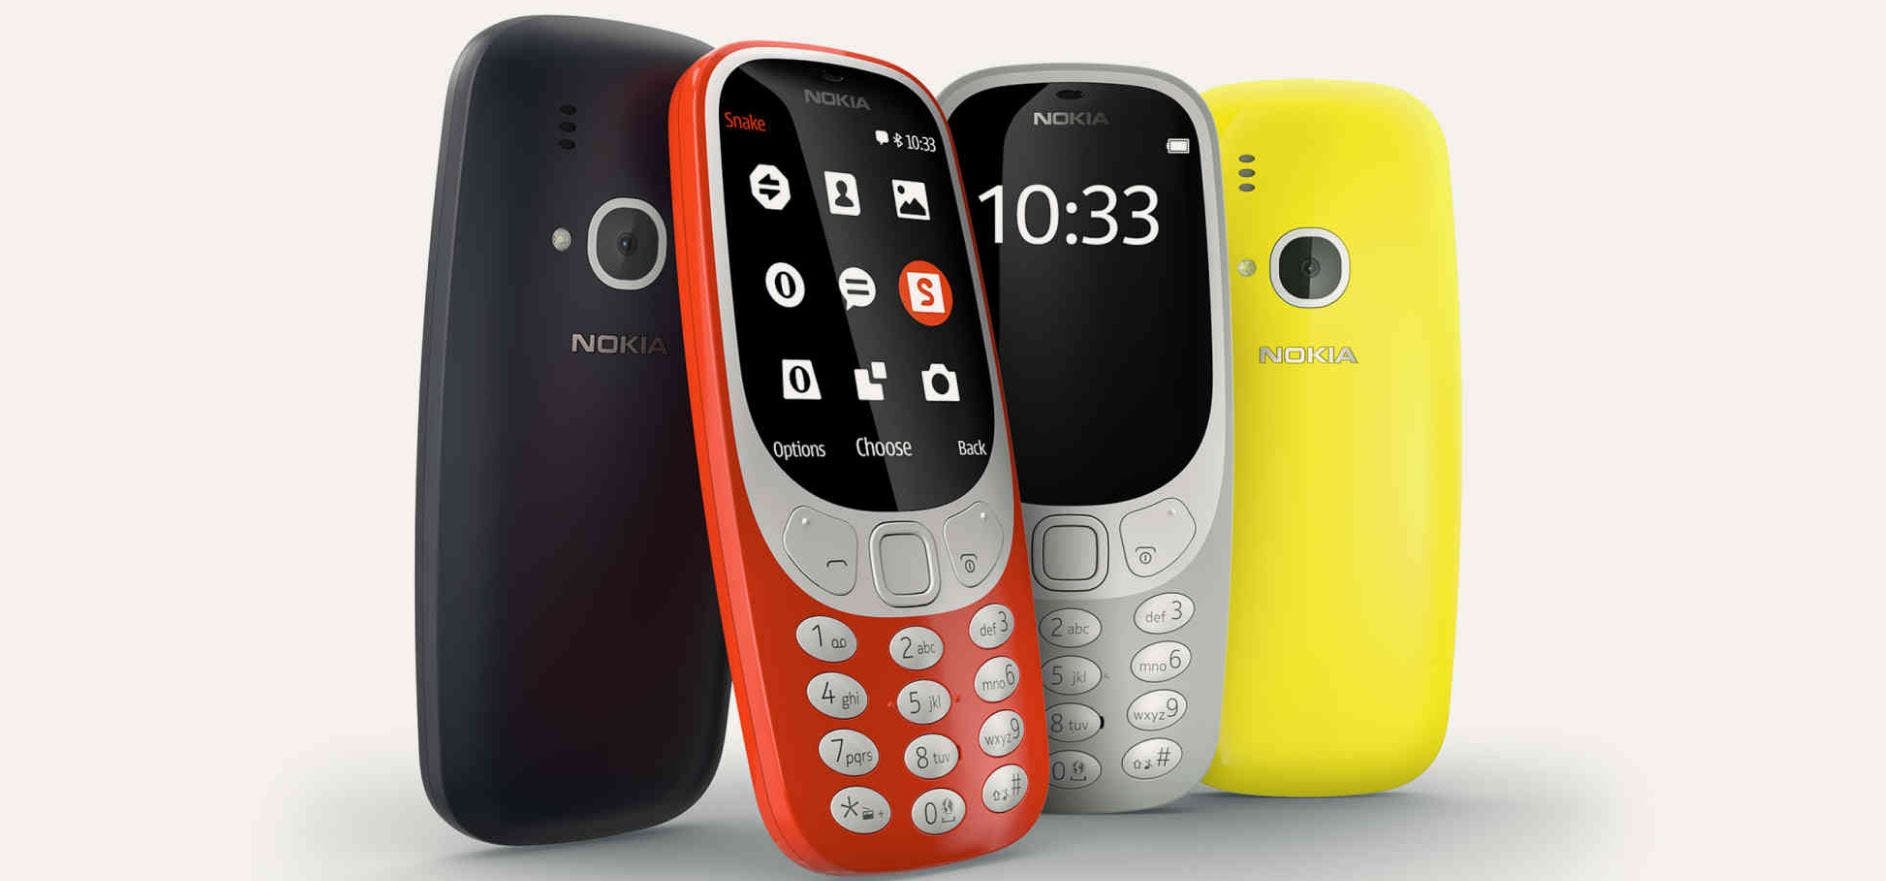 Nokia Officially Releases New Version of 3310 Brick Phone